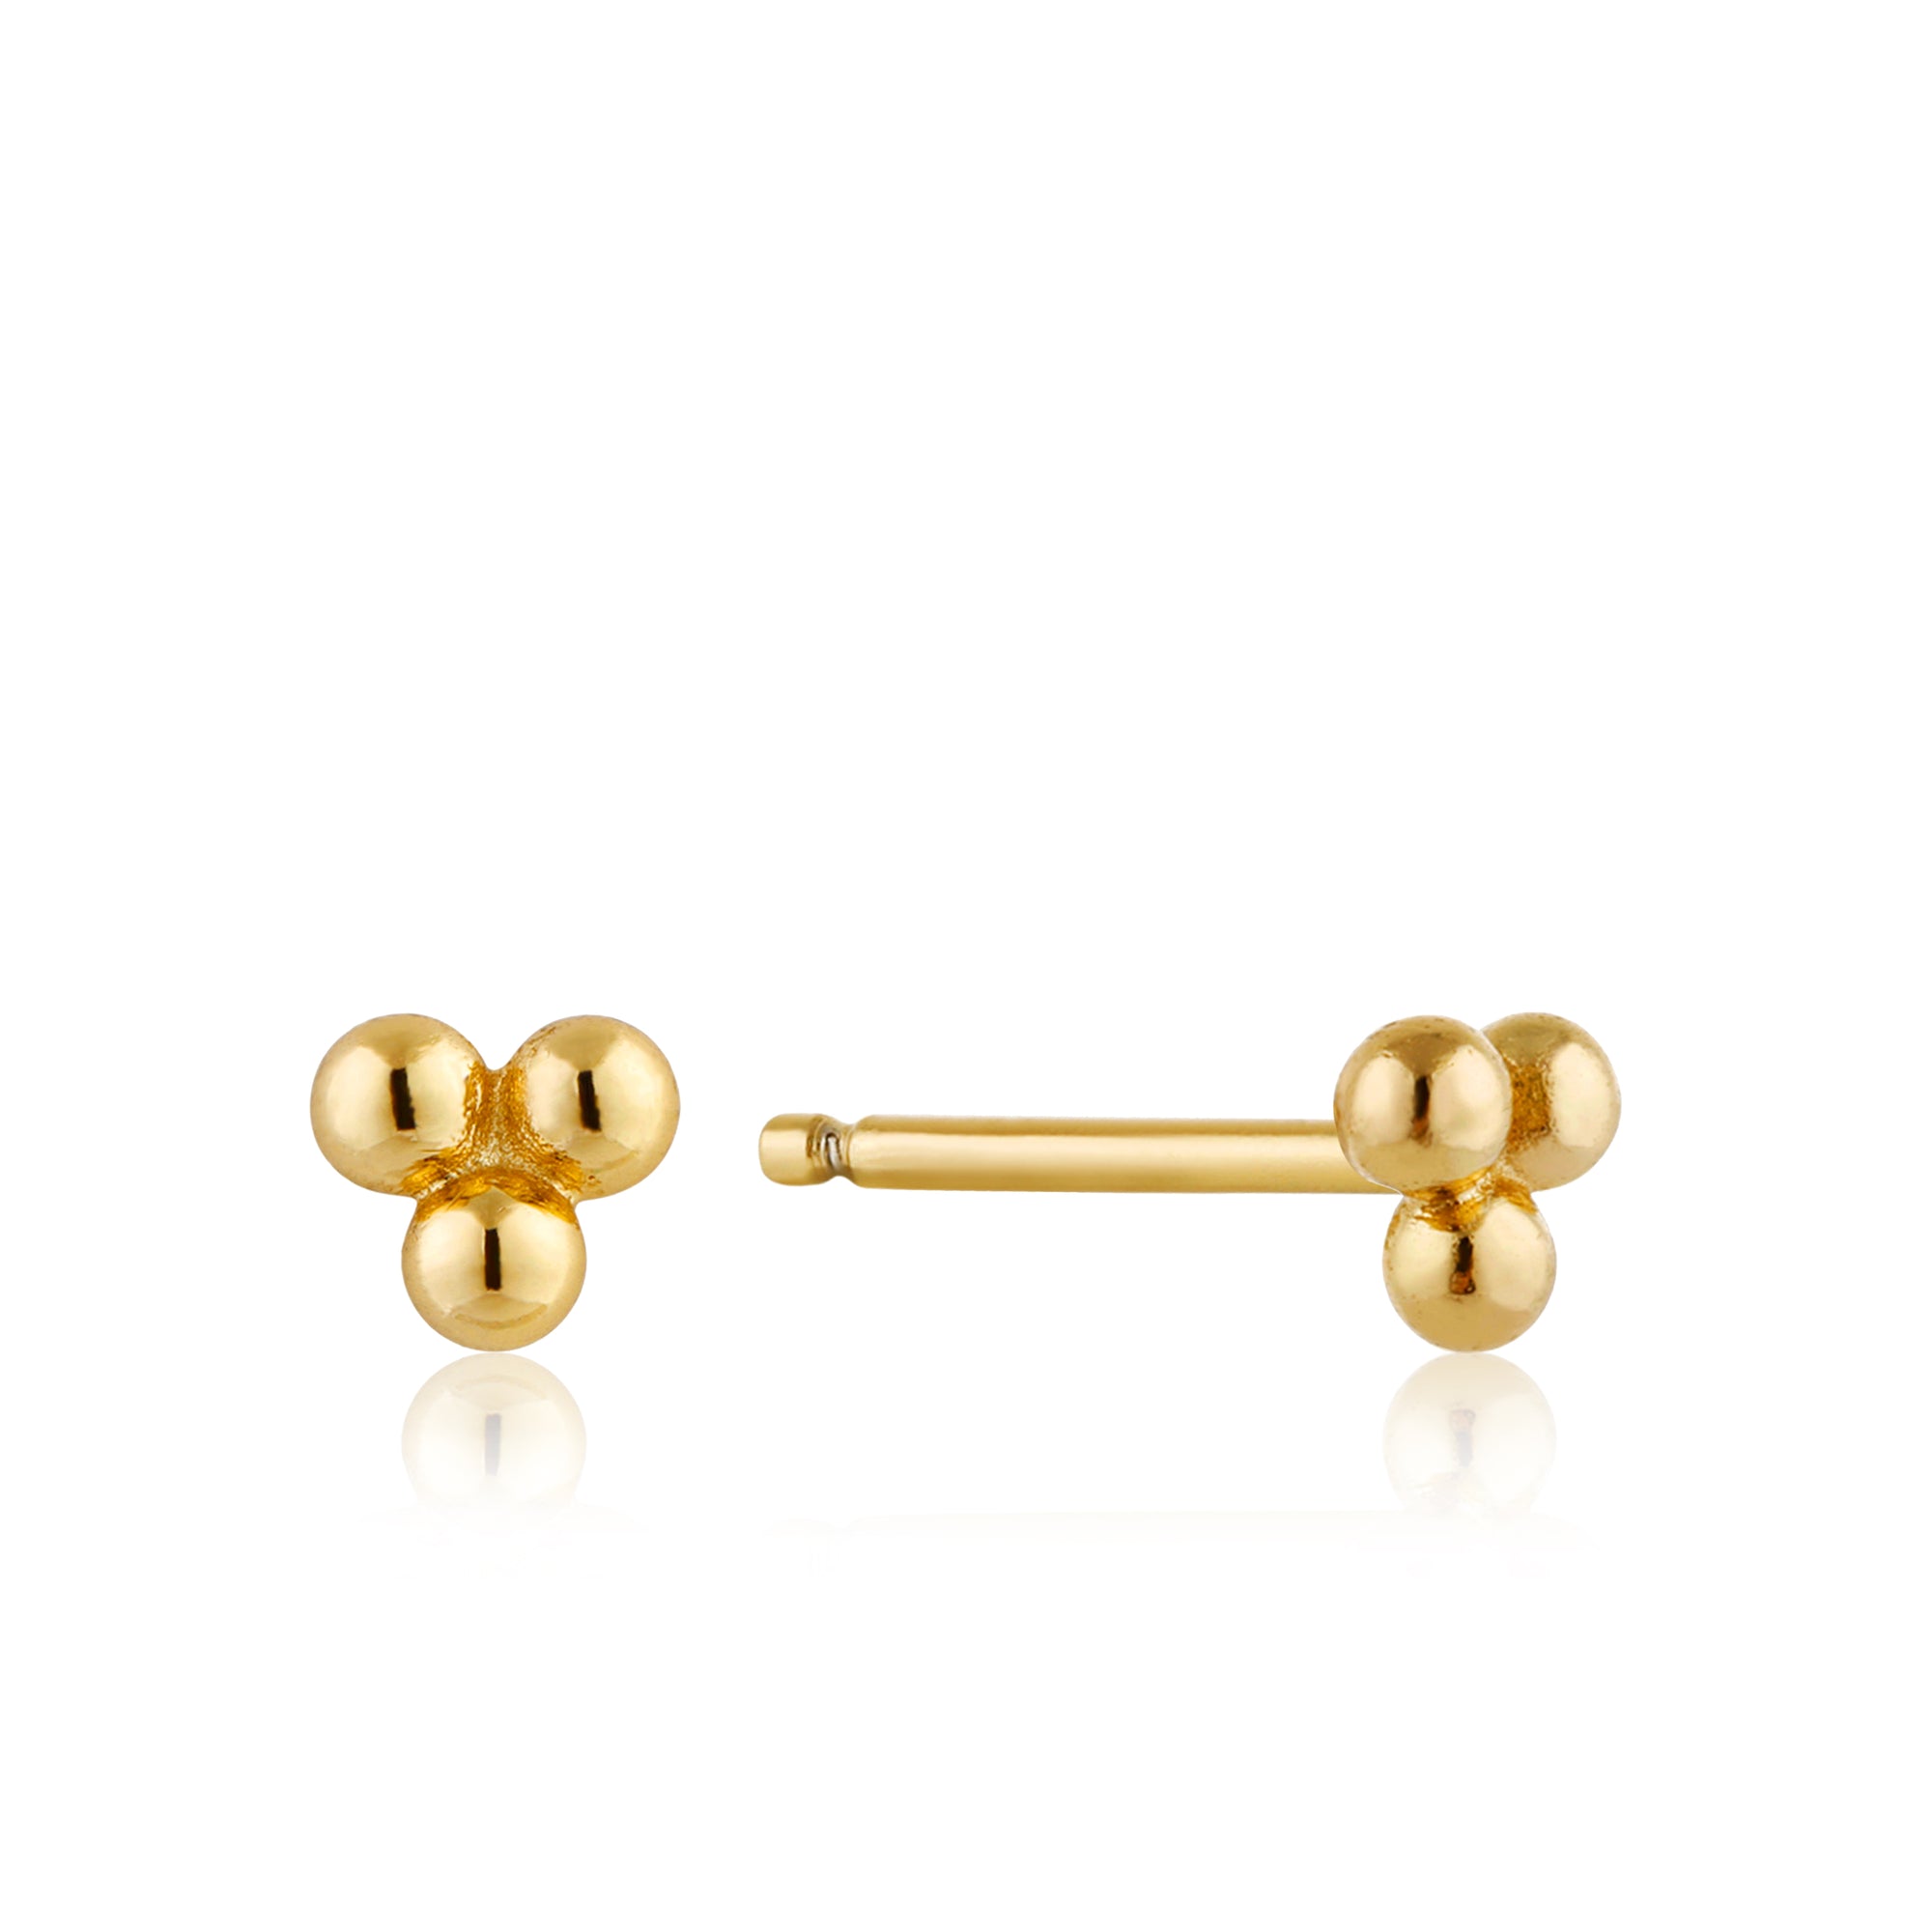 ANIA HAIE ANIA HAIE - Gold Modern Triple Ball Stud Earrings available at The Good Life Boutique